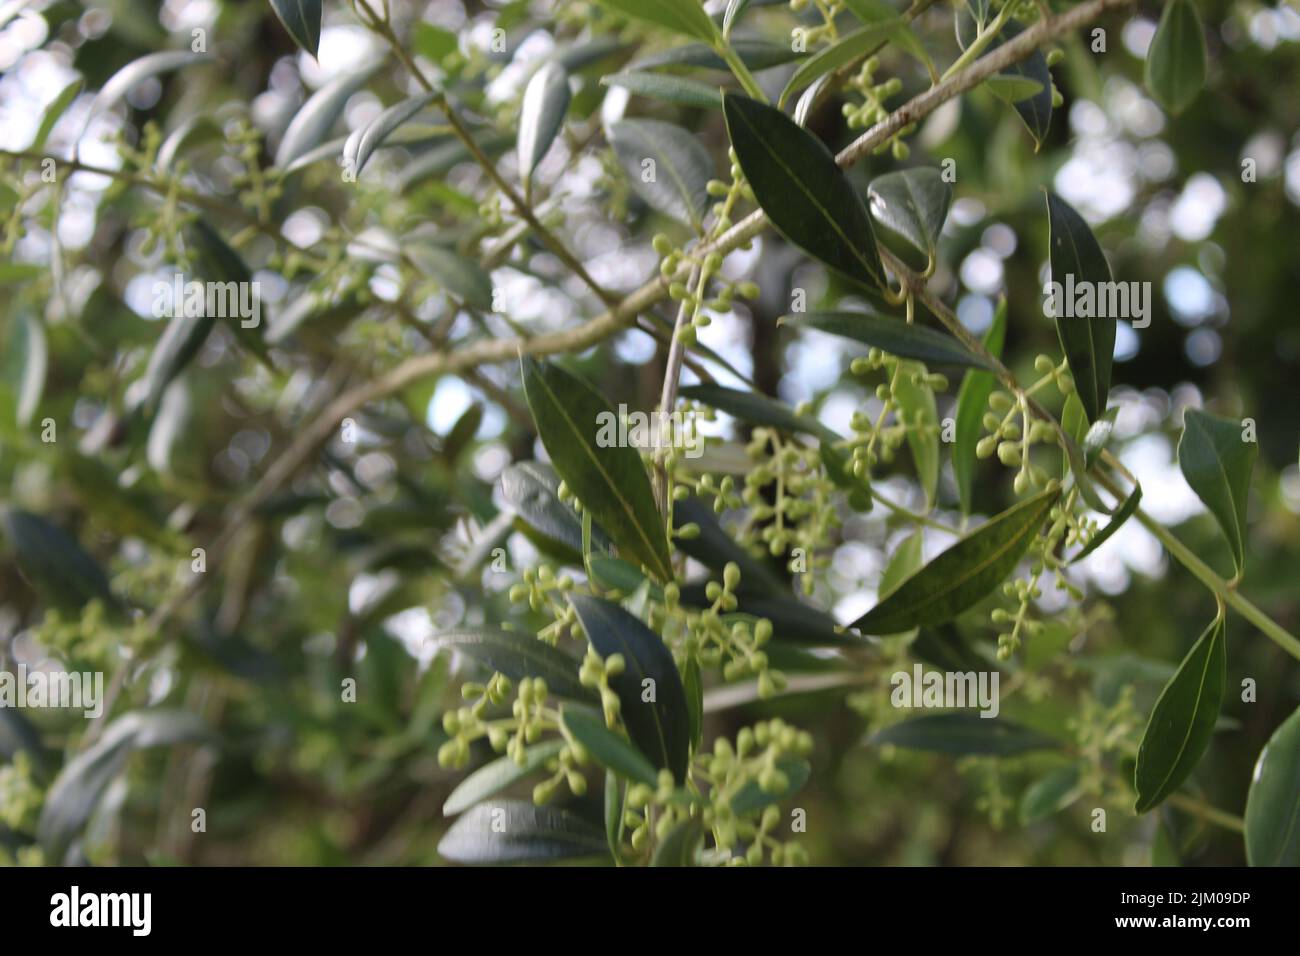 A closeup shot of a camphor tree on the blurry background Stock Photo